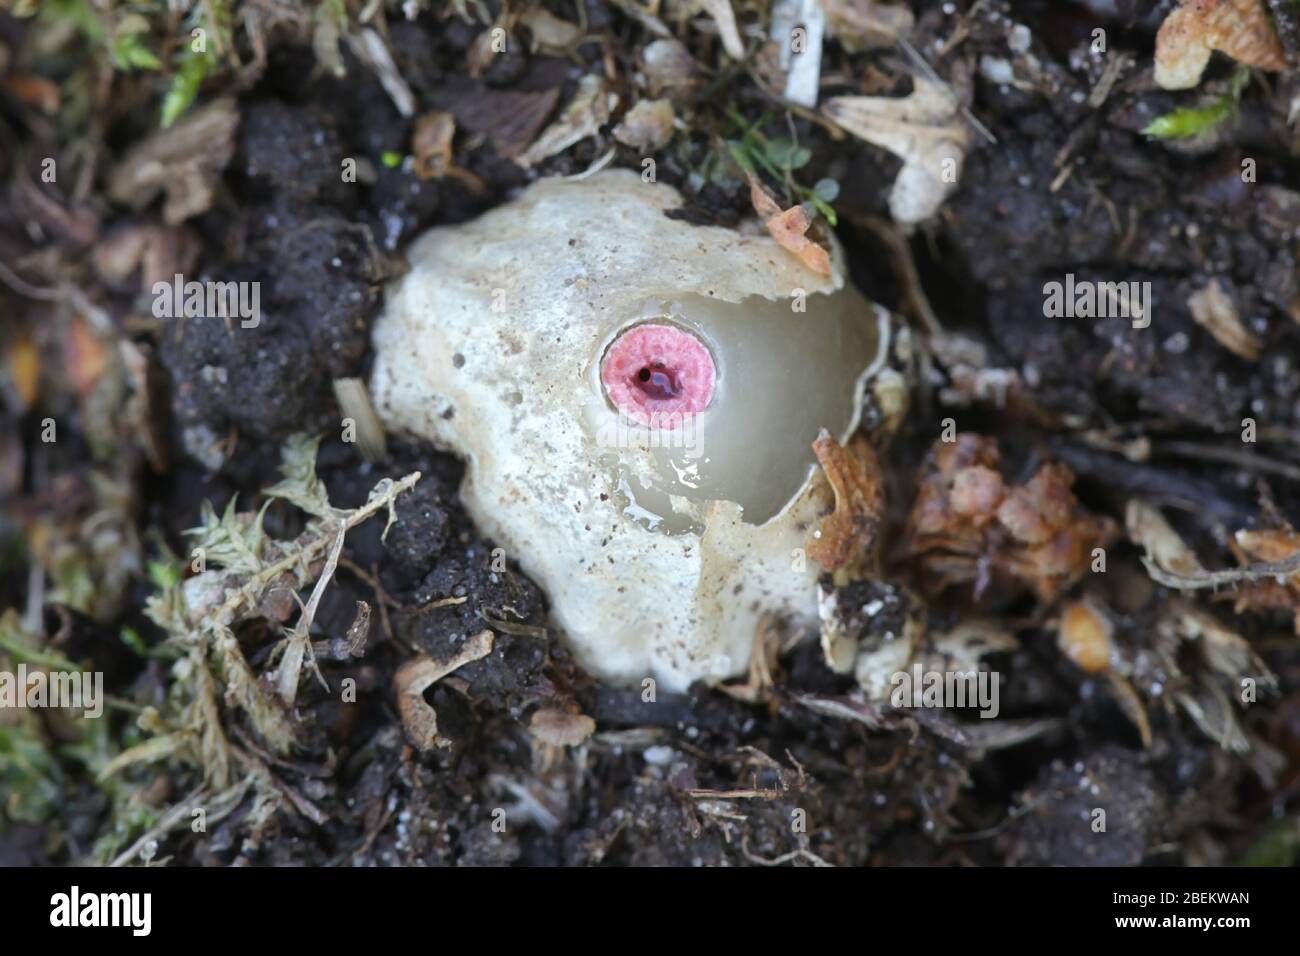 Mutinus ravenelii, known as the red stinkhorn fungus, egg of stinkhorn  from Finland Stock Photo